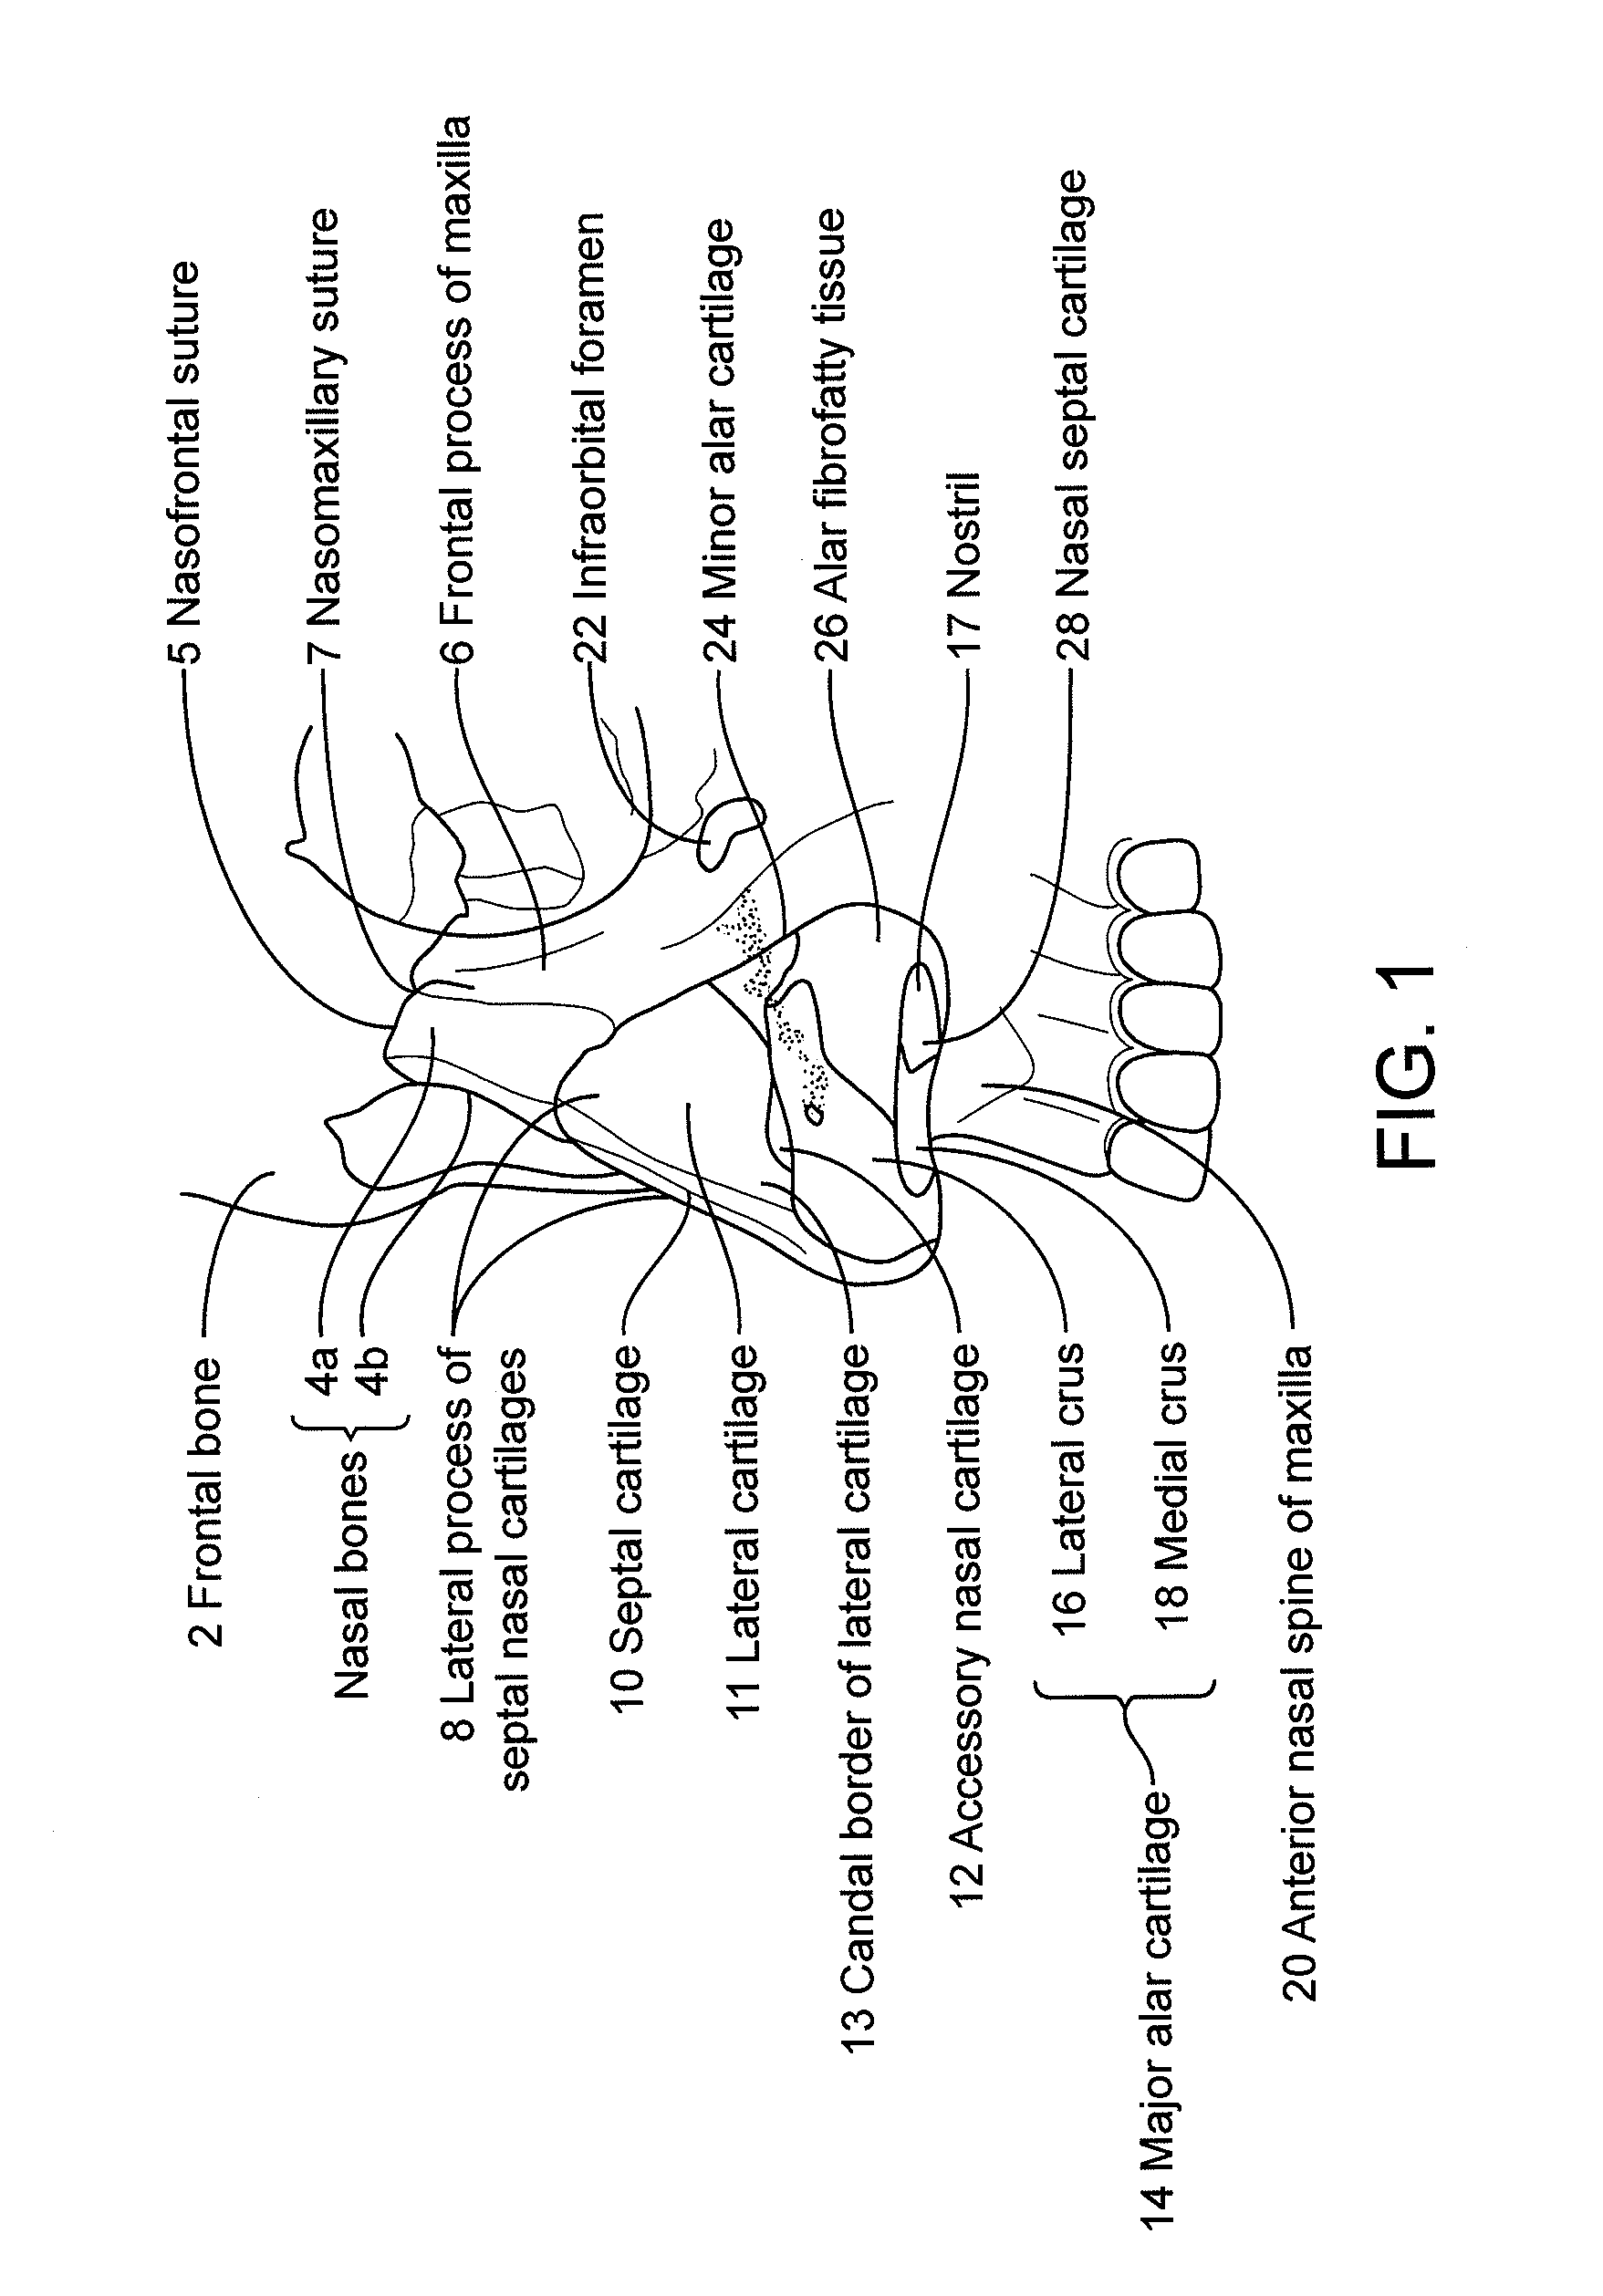 Nasal implants and systems and method of use